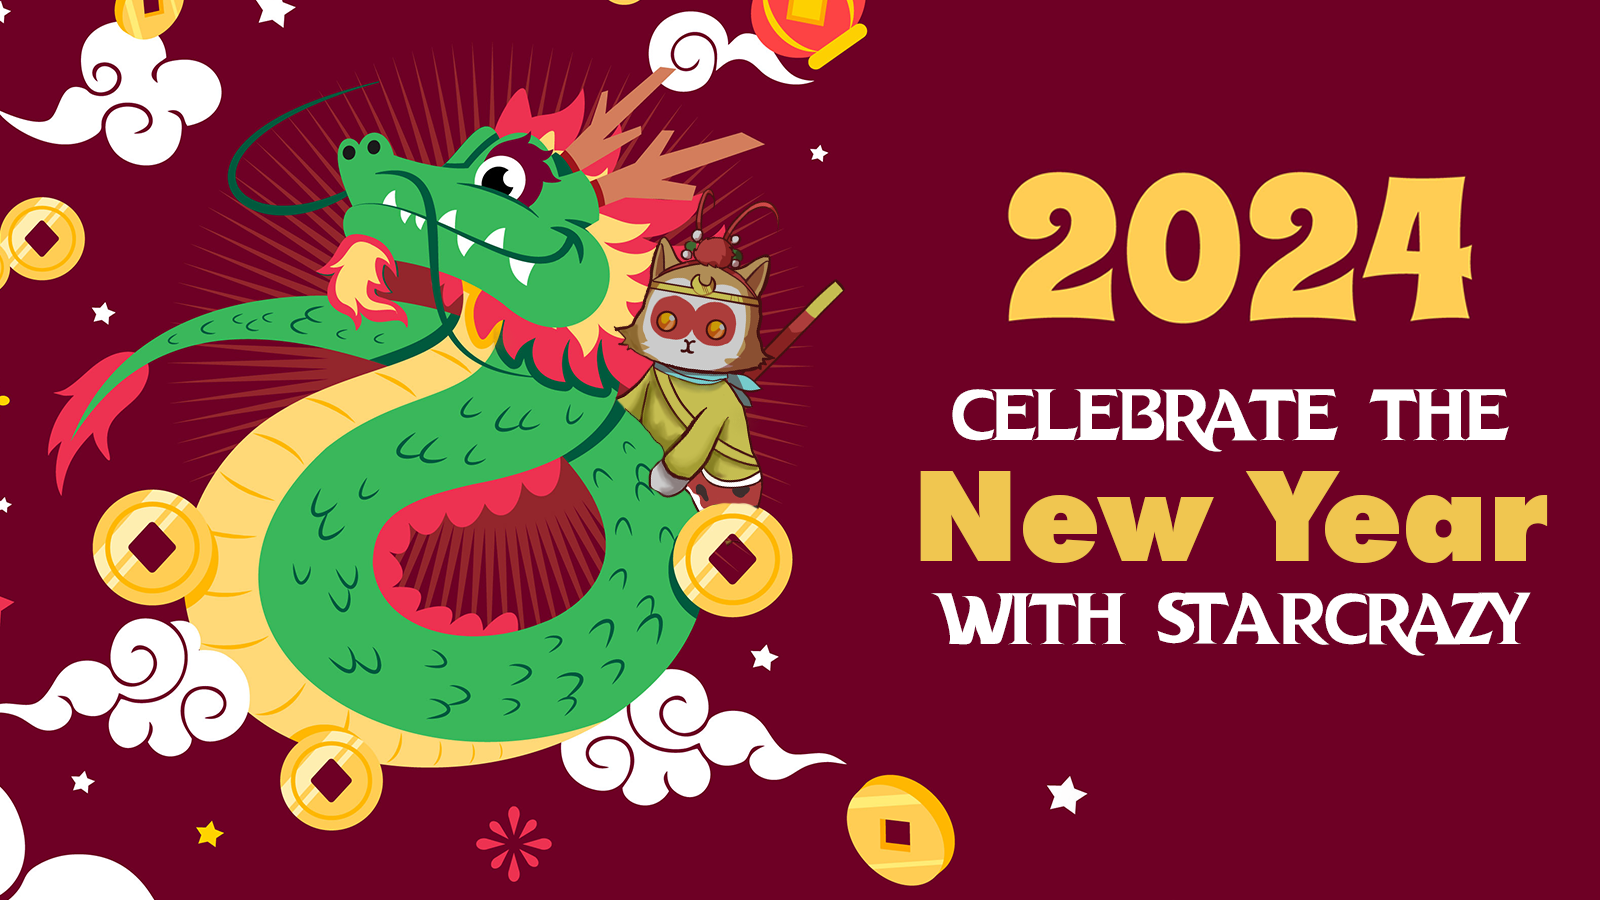 Celebrate the New Year with StarCrazy